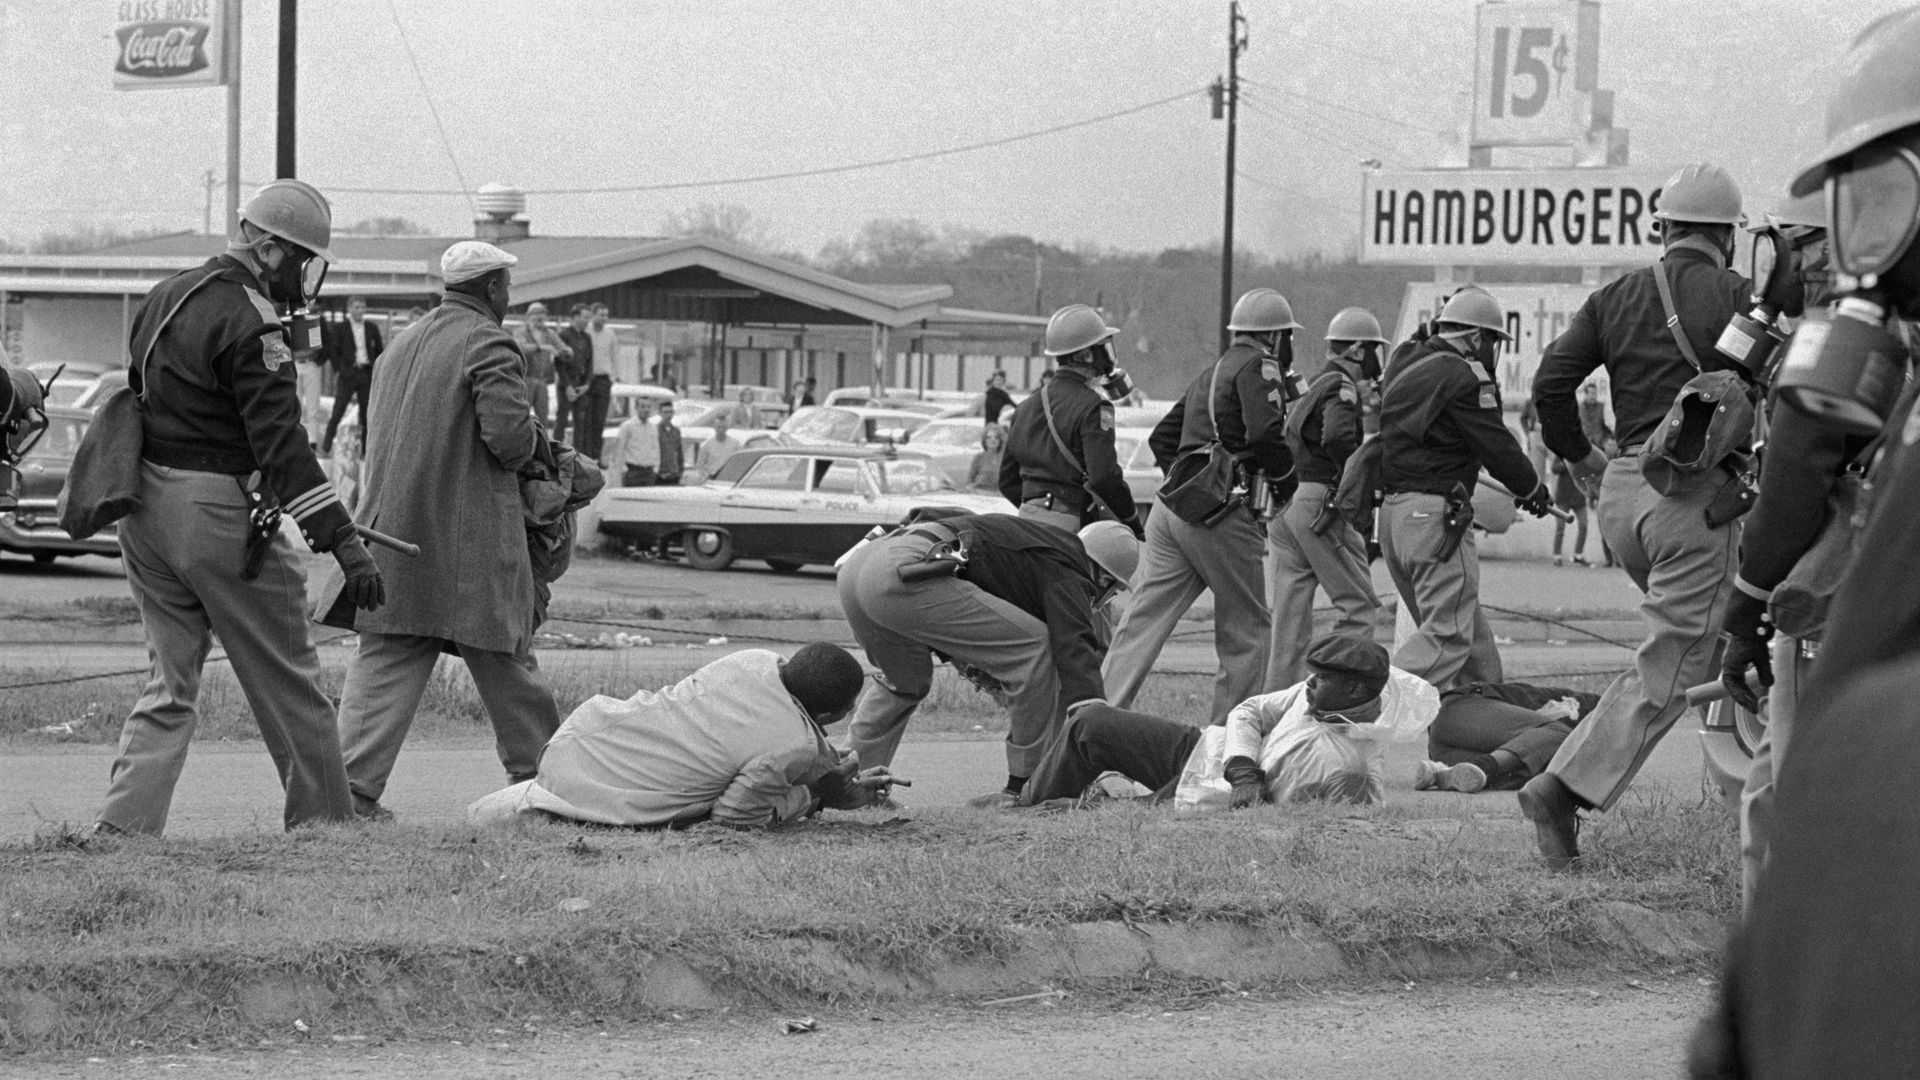 Historical photo of civil rights protesters in 1965 Selma, Alabama, injured on the ground and being ignored by passing police